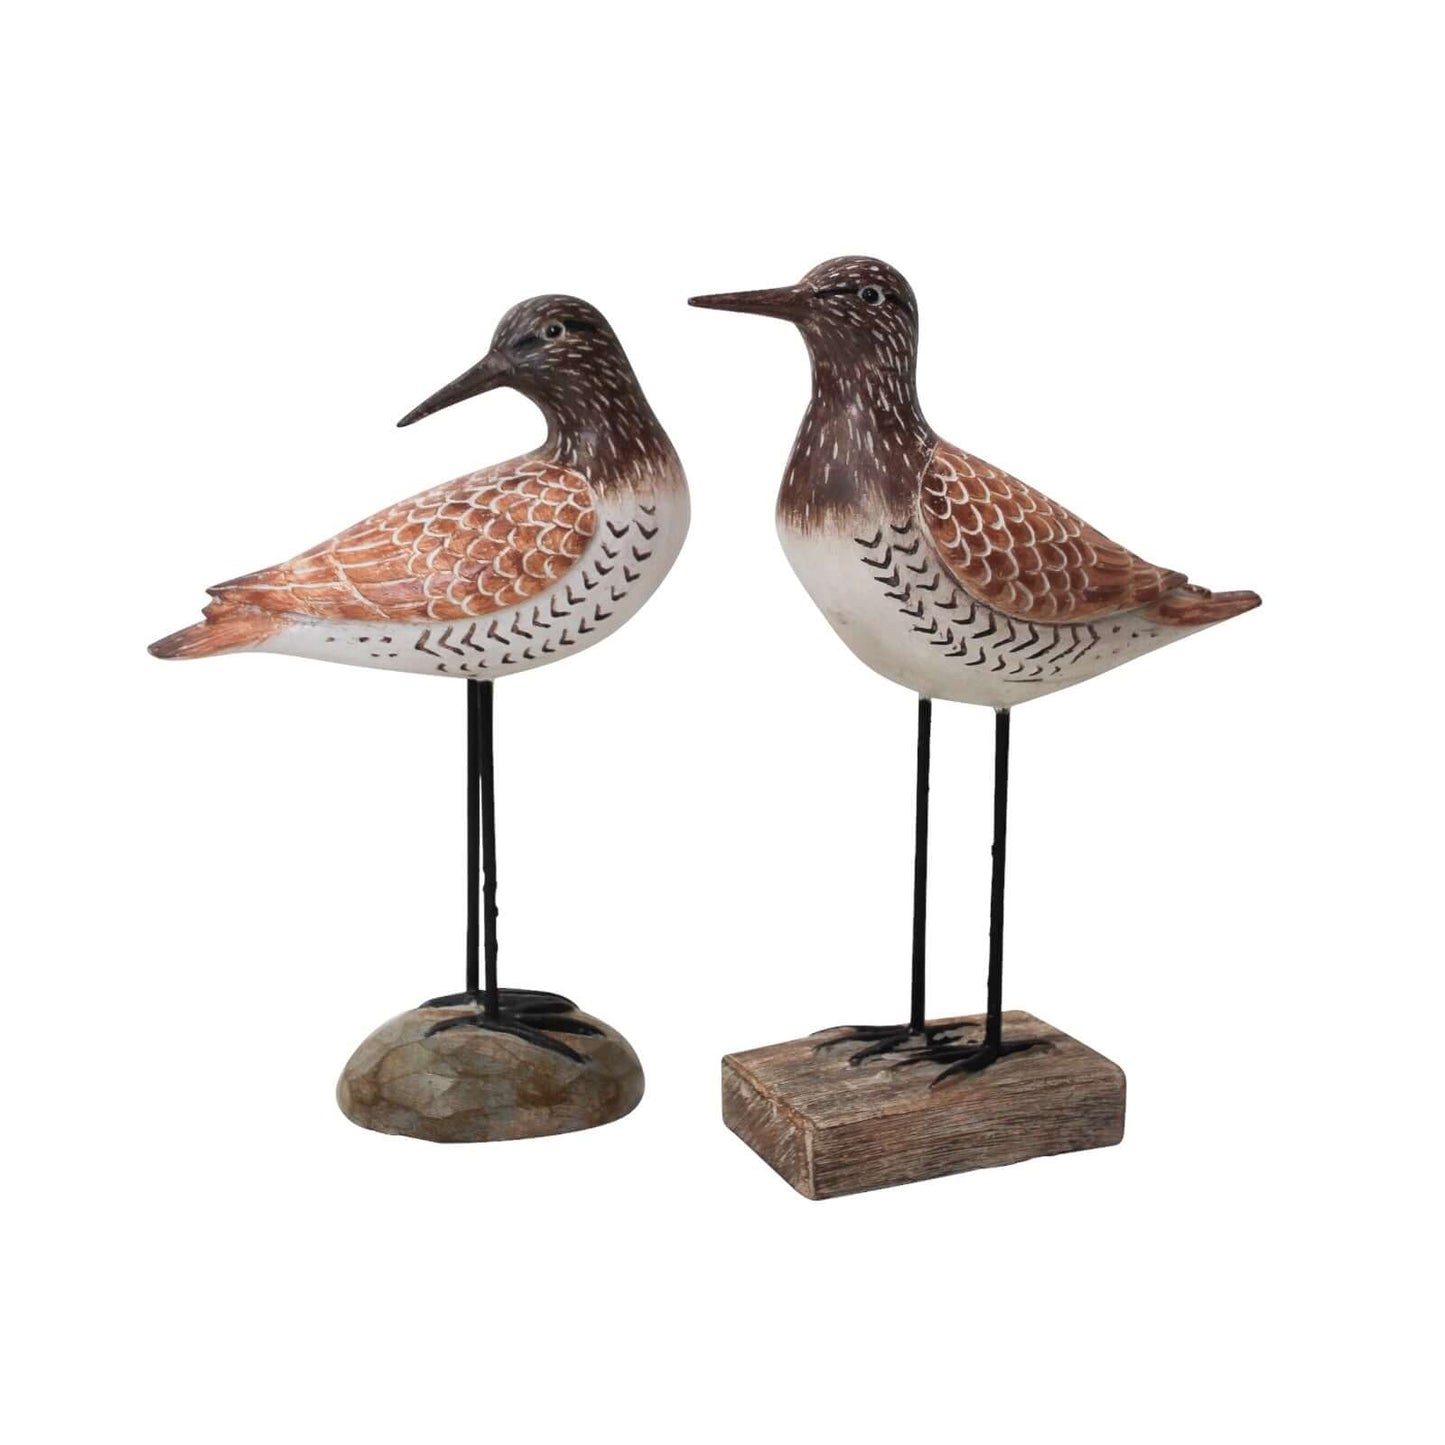 Bird Dusk Set of 2 Ornament - The Renmy Store Homewares & Gifts 